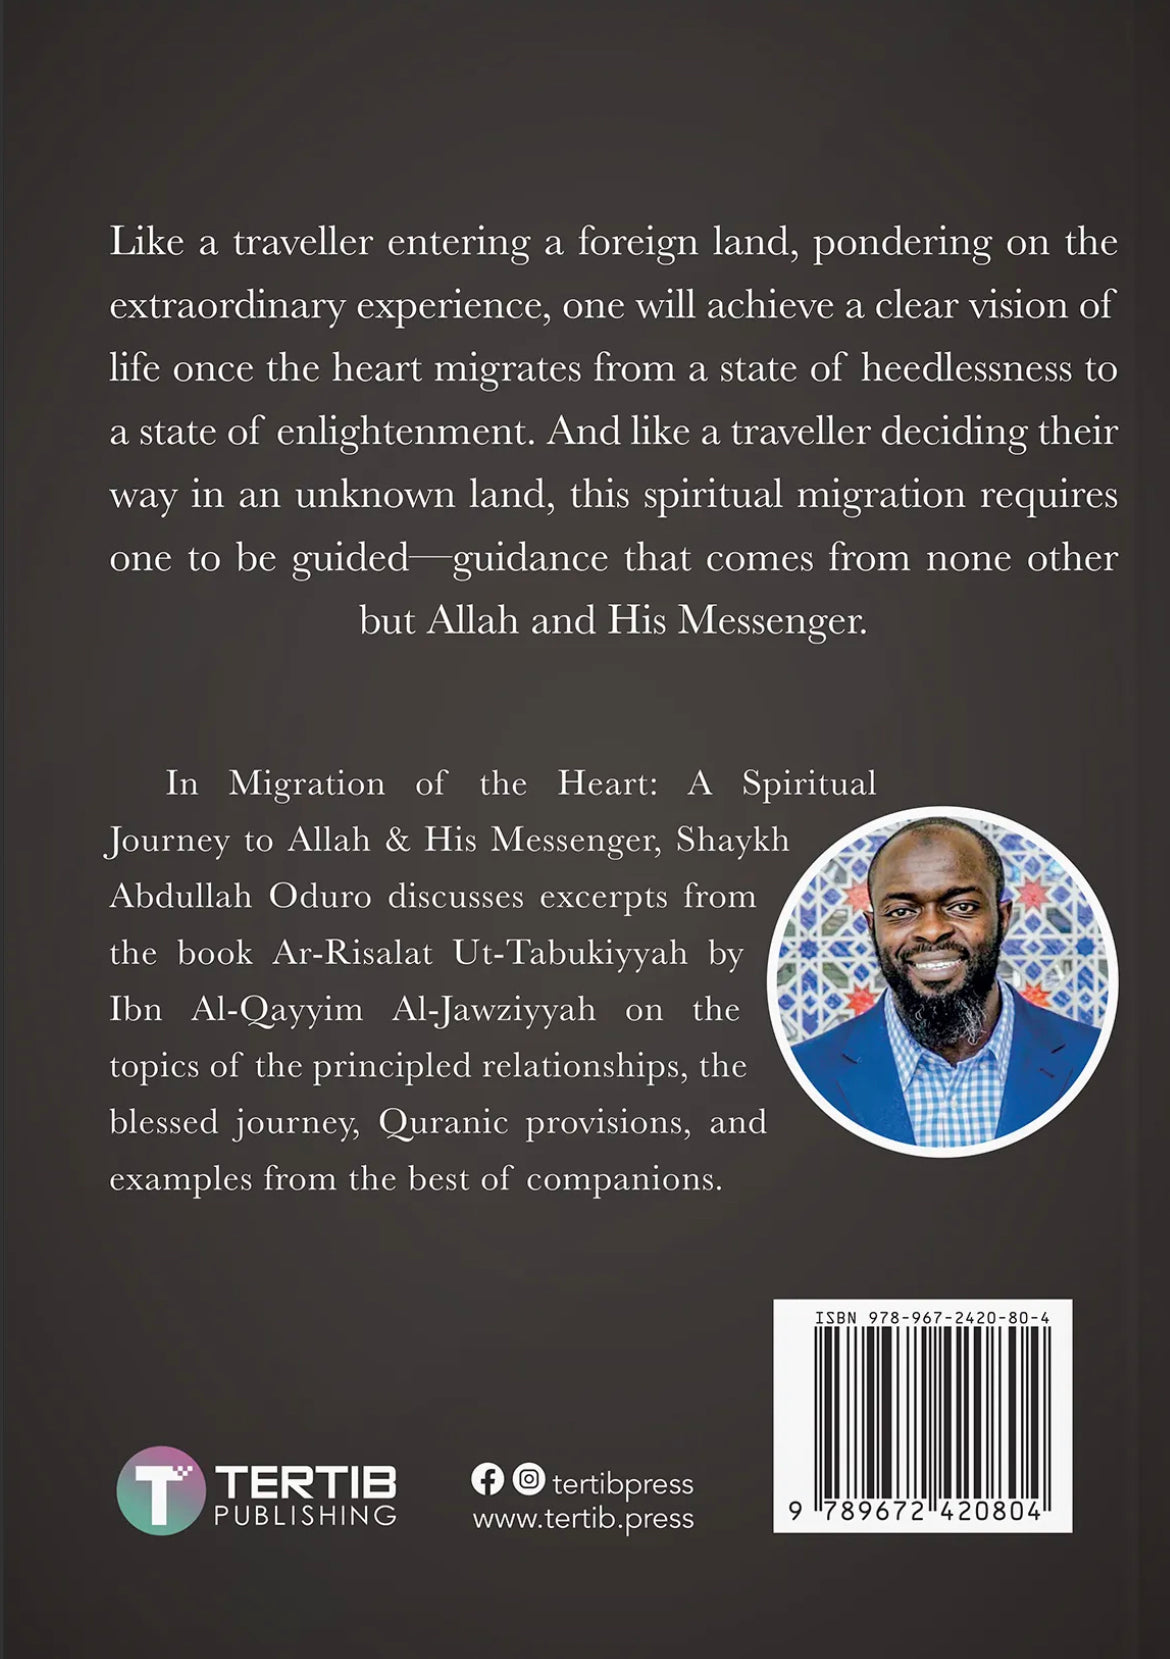 Migration of the Heart: A Spiritual Journey to Allah and His Messenger (DC)